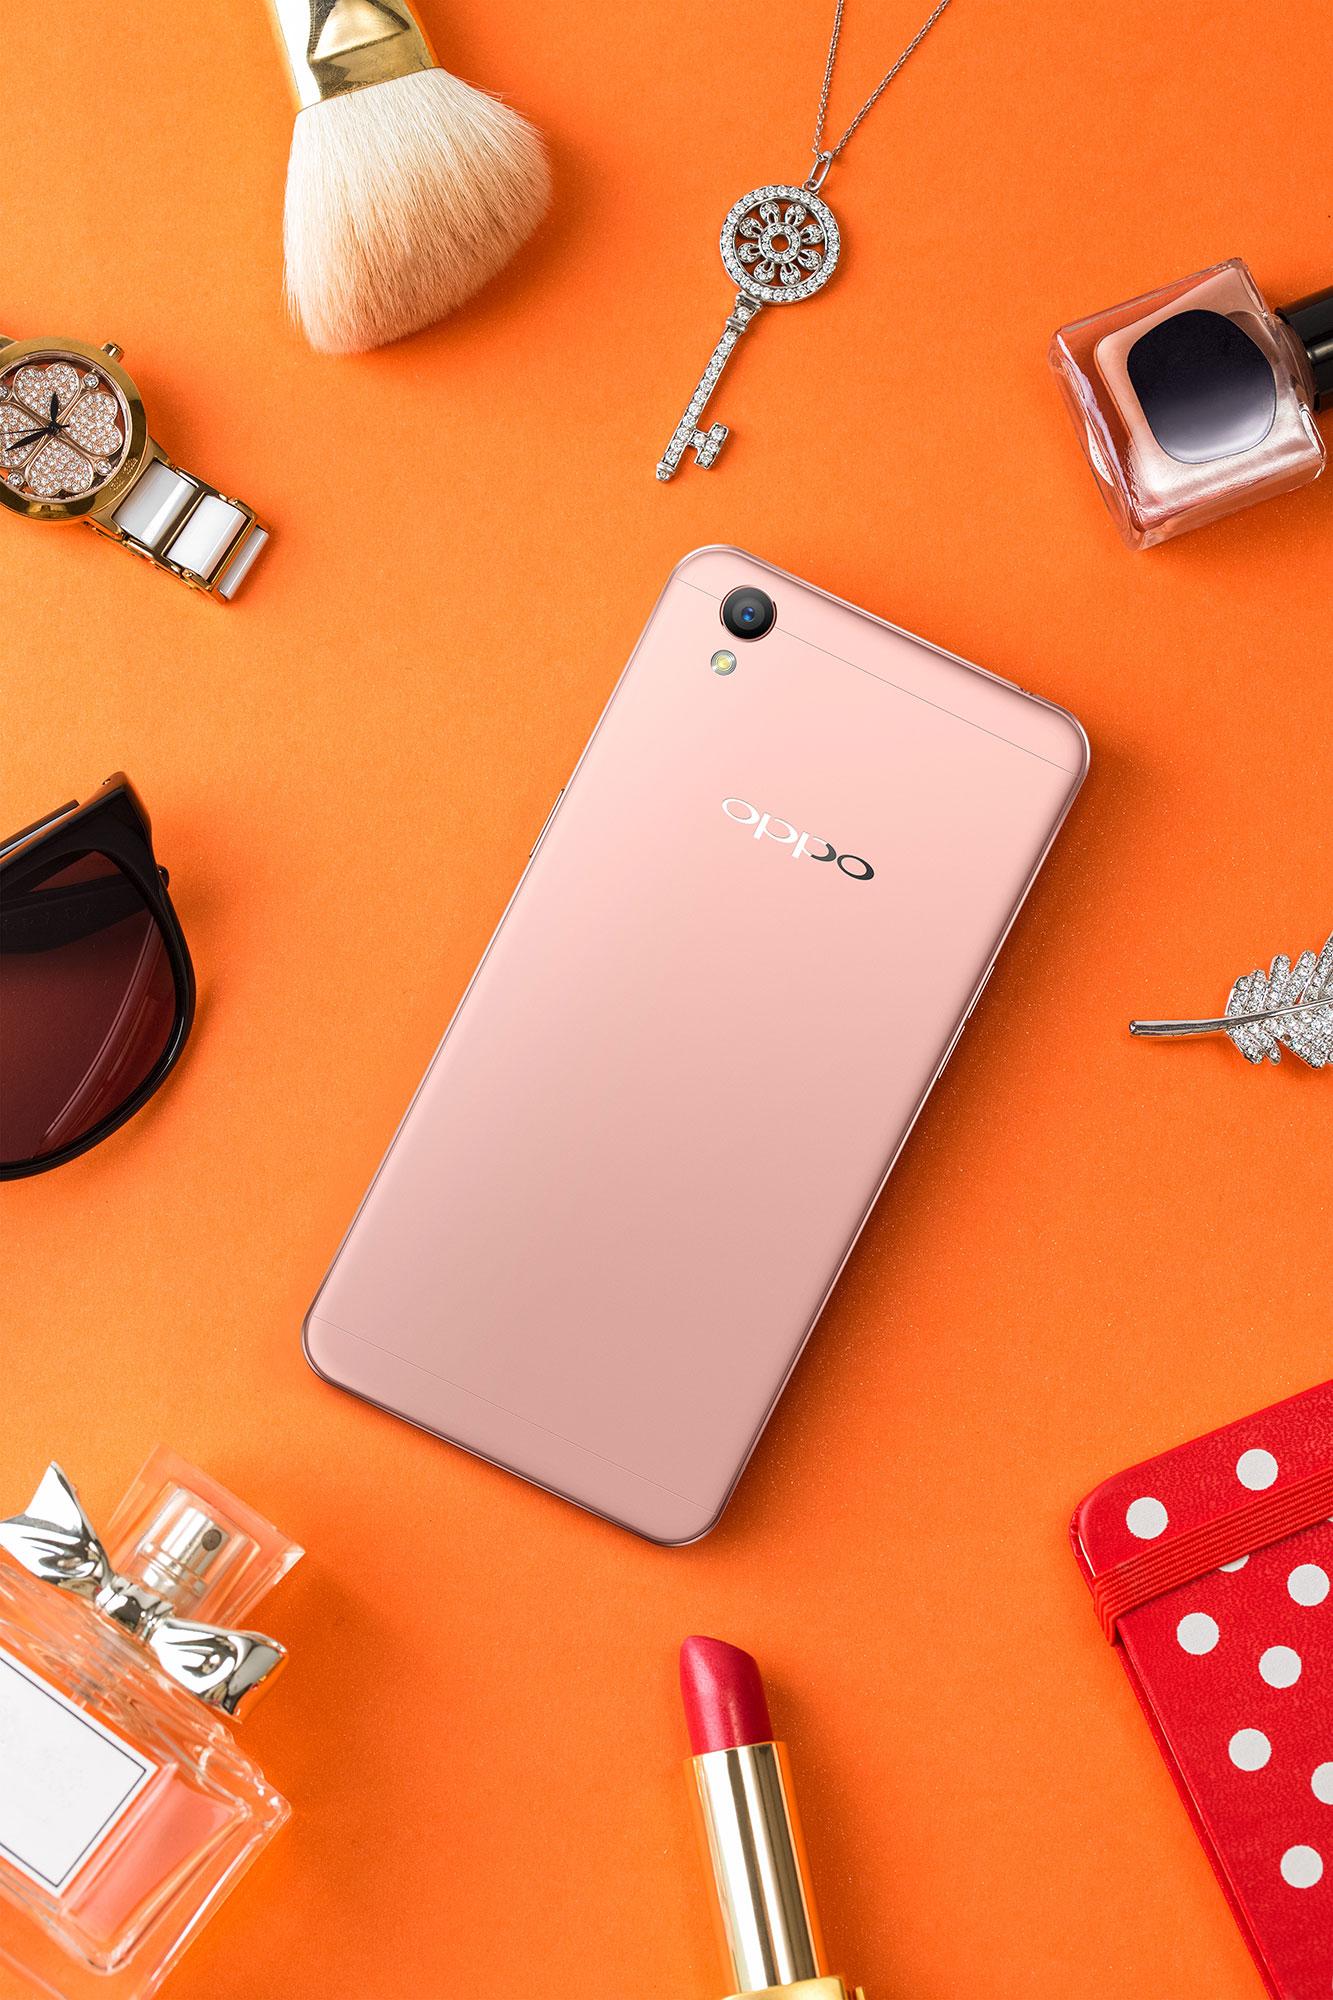 Oppo A37 rosa